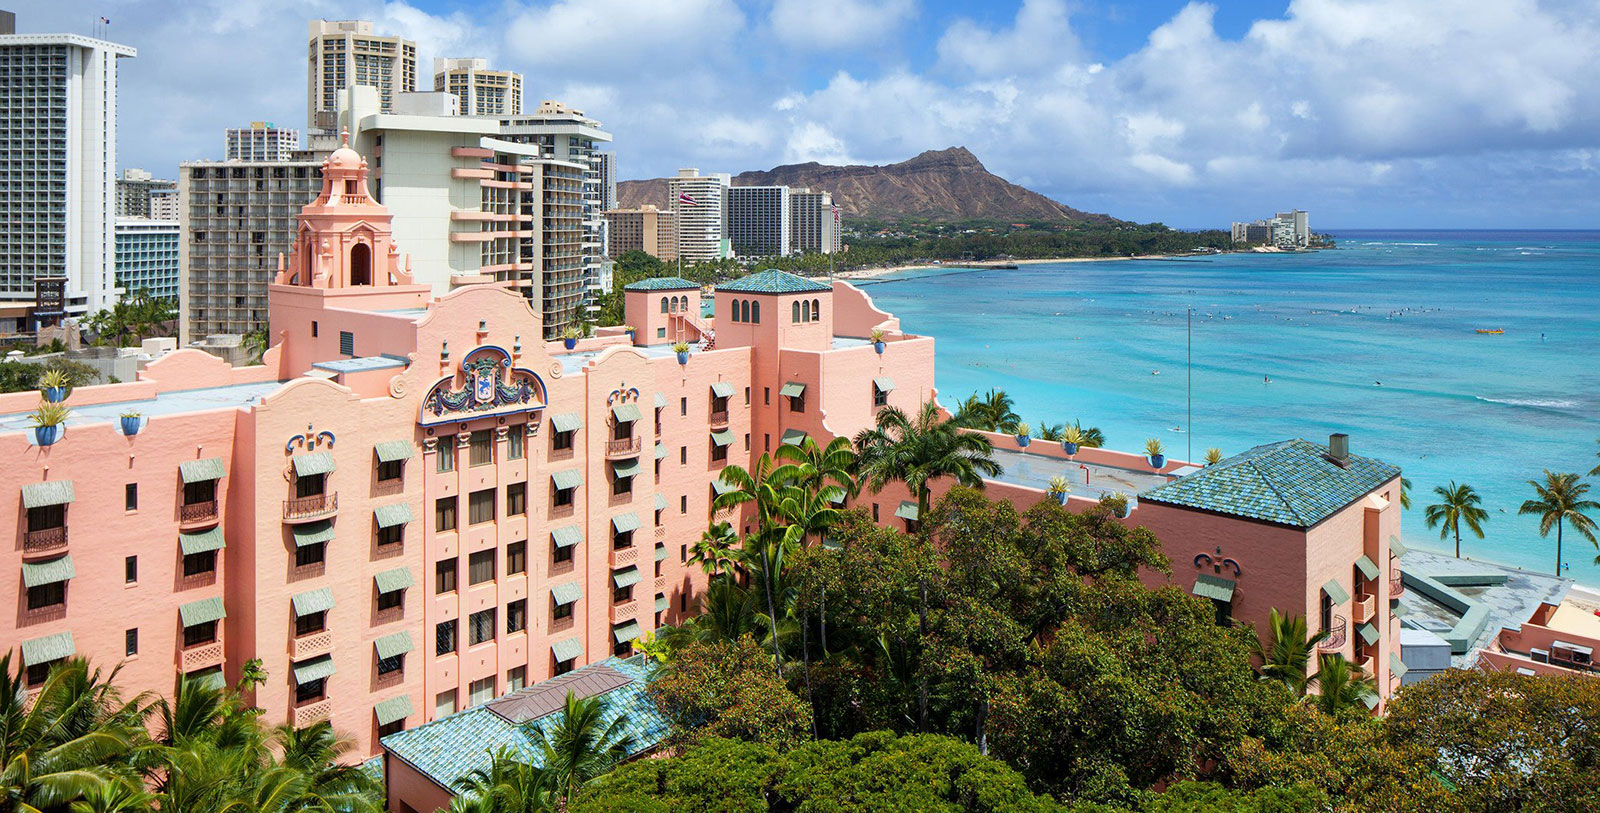 Image of Hotel Exterior and Waikiki, Honolulu cityscape in background, The Royal Hawaiian, A Luxury Collection Resort, 1927, Member of Historic Hotels of America, in Honolulu, Hawaii, Discover